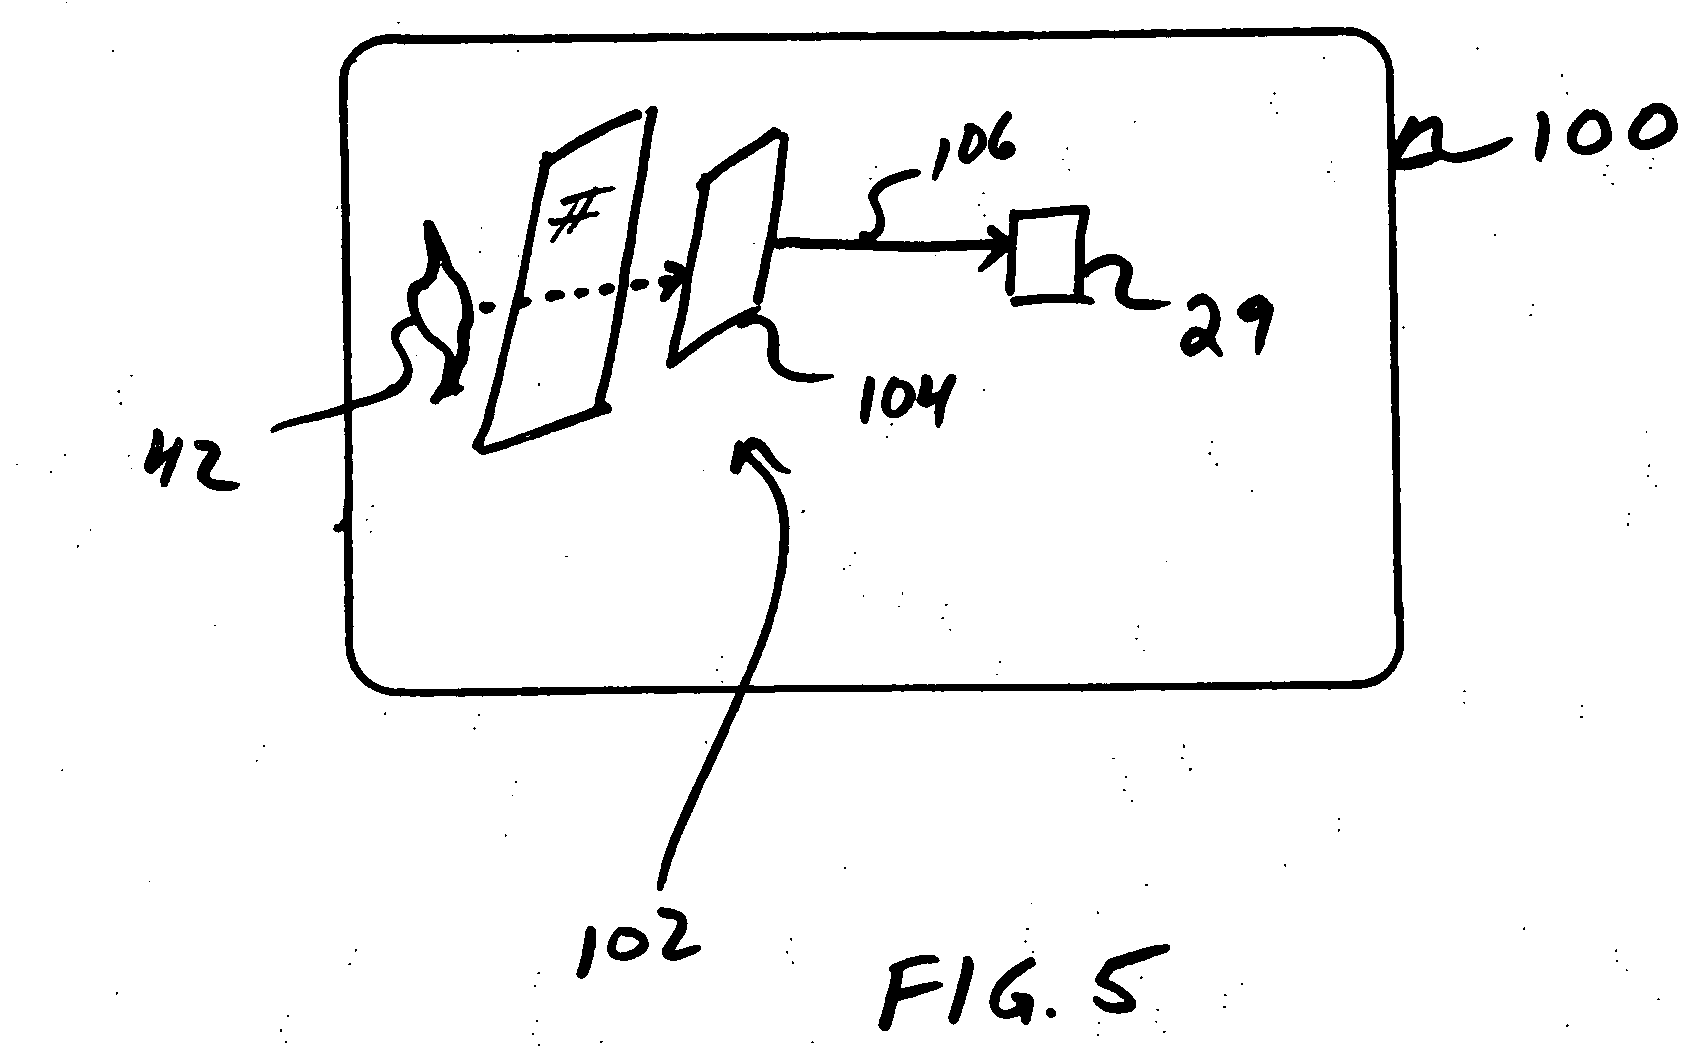 Method and apparatus for detecting a burner flame of a gas appliance